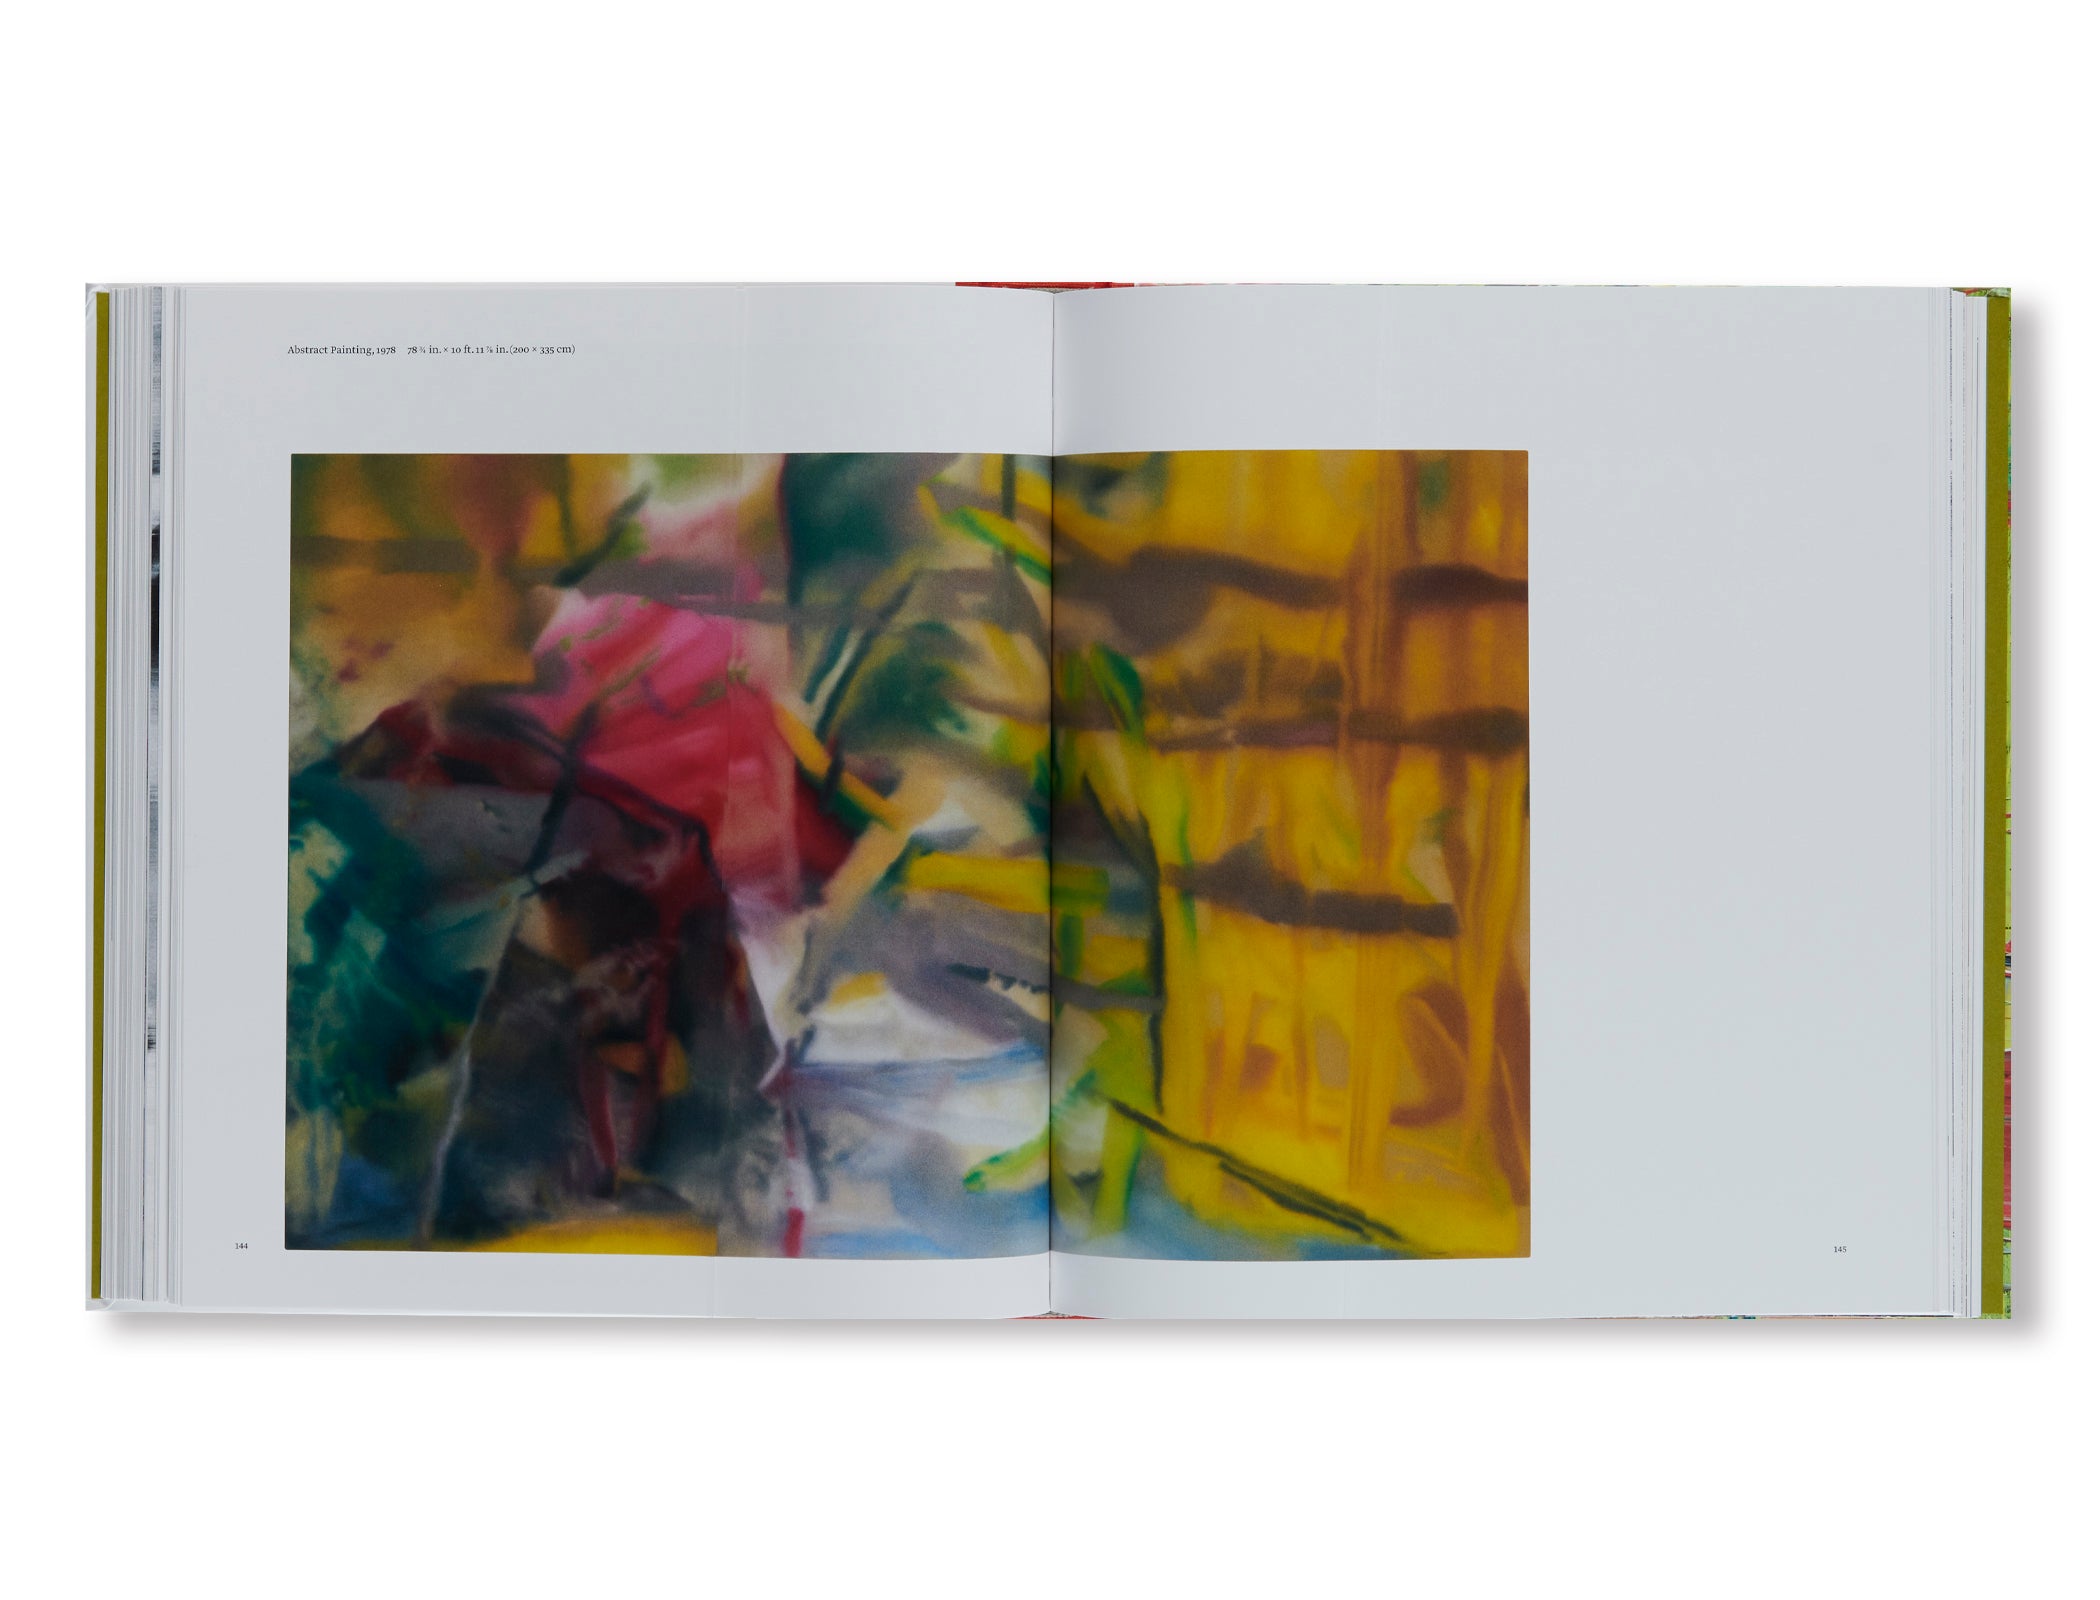 PAINTING AFTER ALL by Gerhard Richter